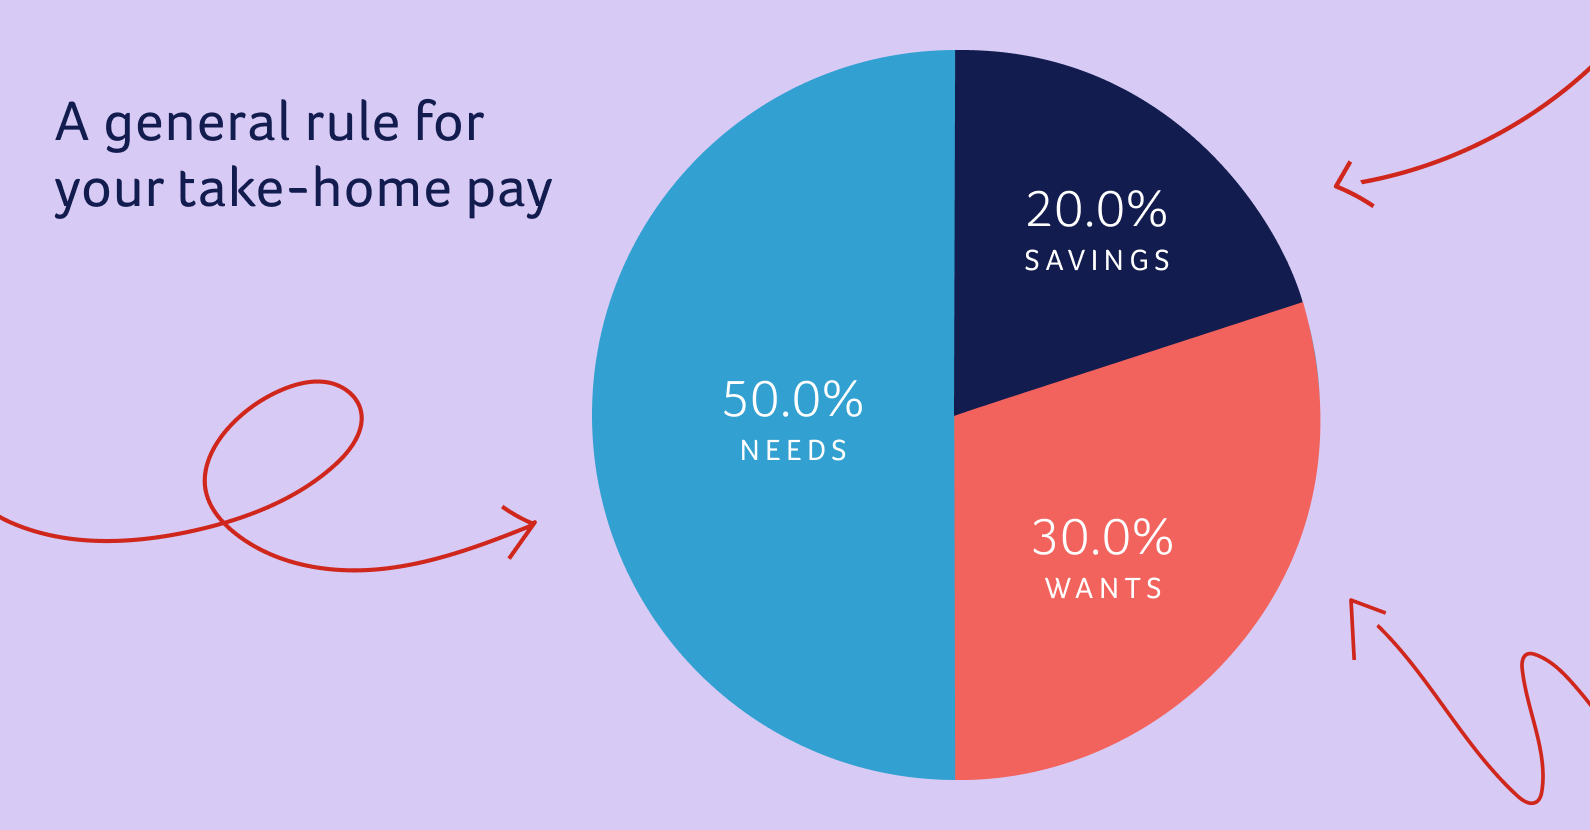 Pie chart graphic titled "A general rule for your take-home page" showing 50% of the pie going to needs, 20% going to savings, and 30% going to wants